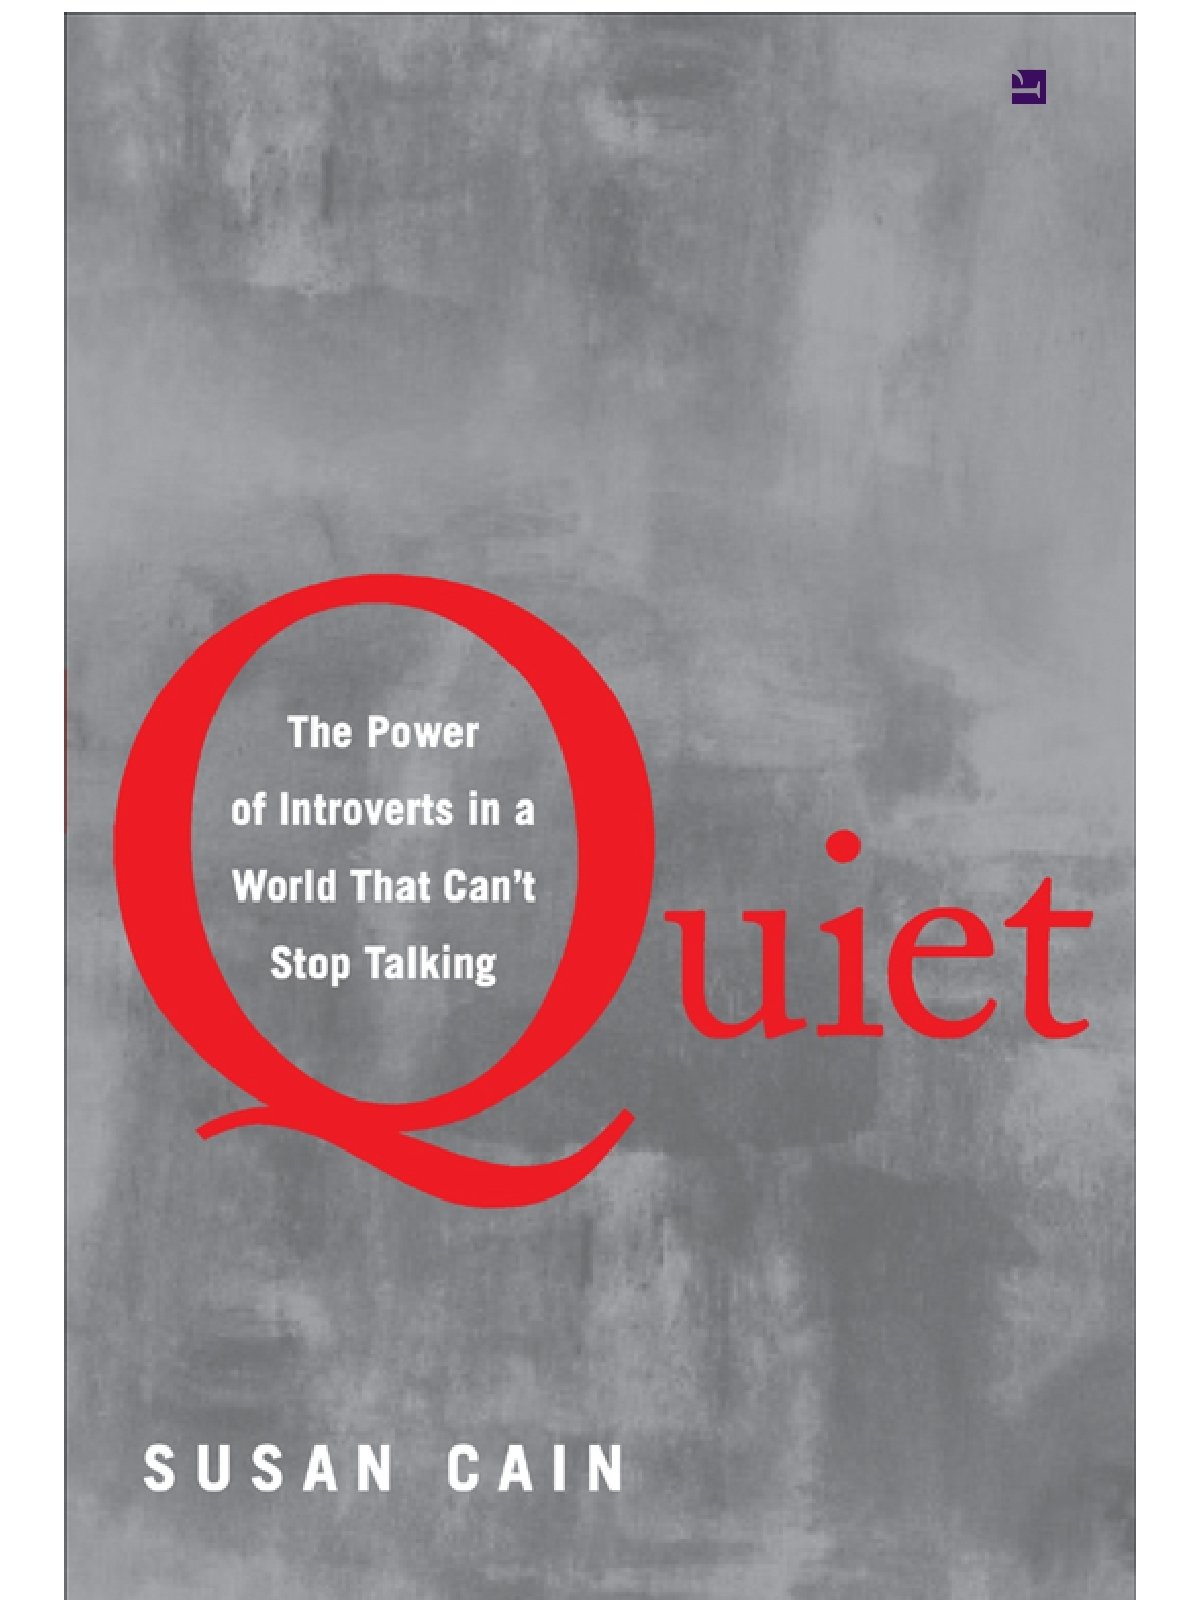 quiet-the-power-of-introverts-in-a-world-that-cant-stop-talking-susan-cain